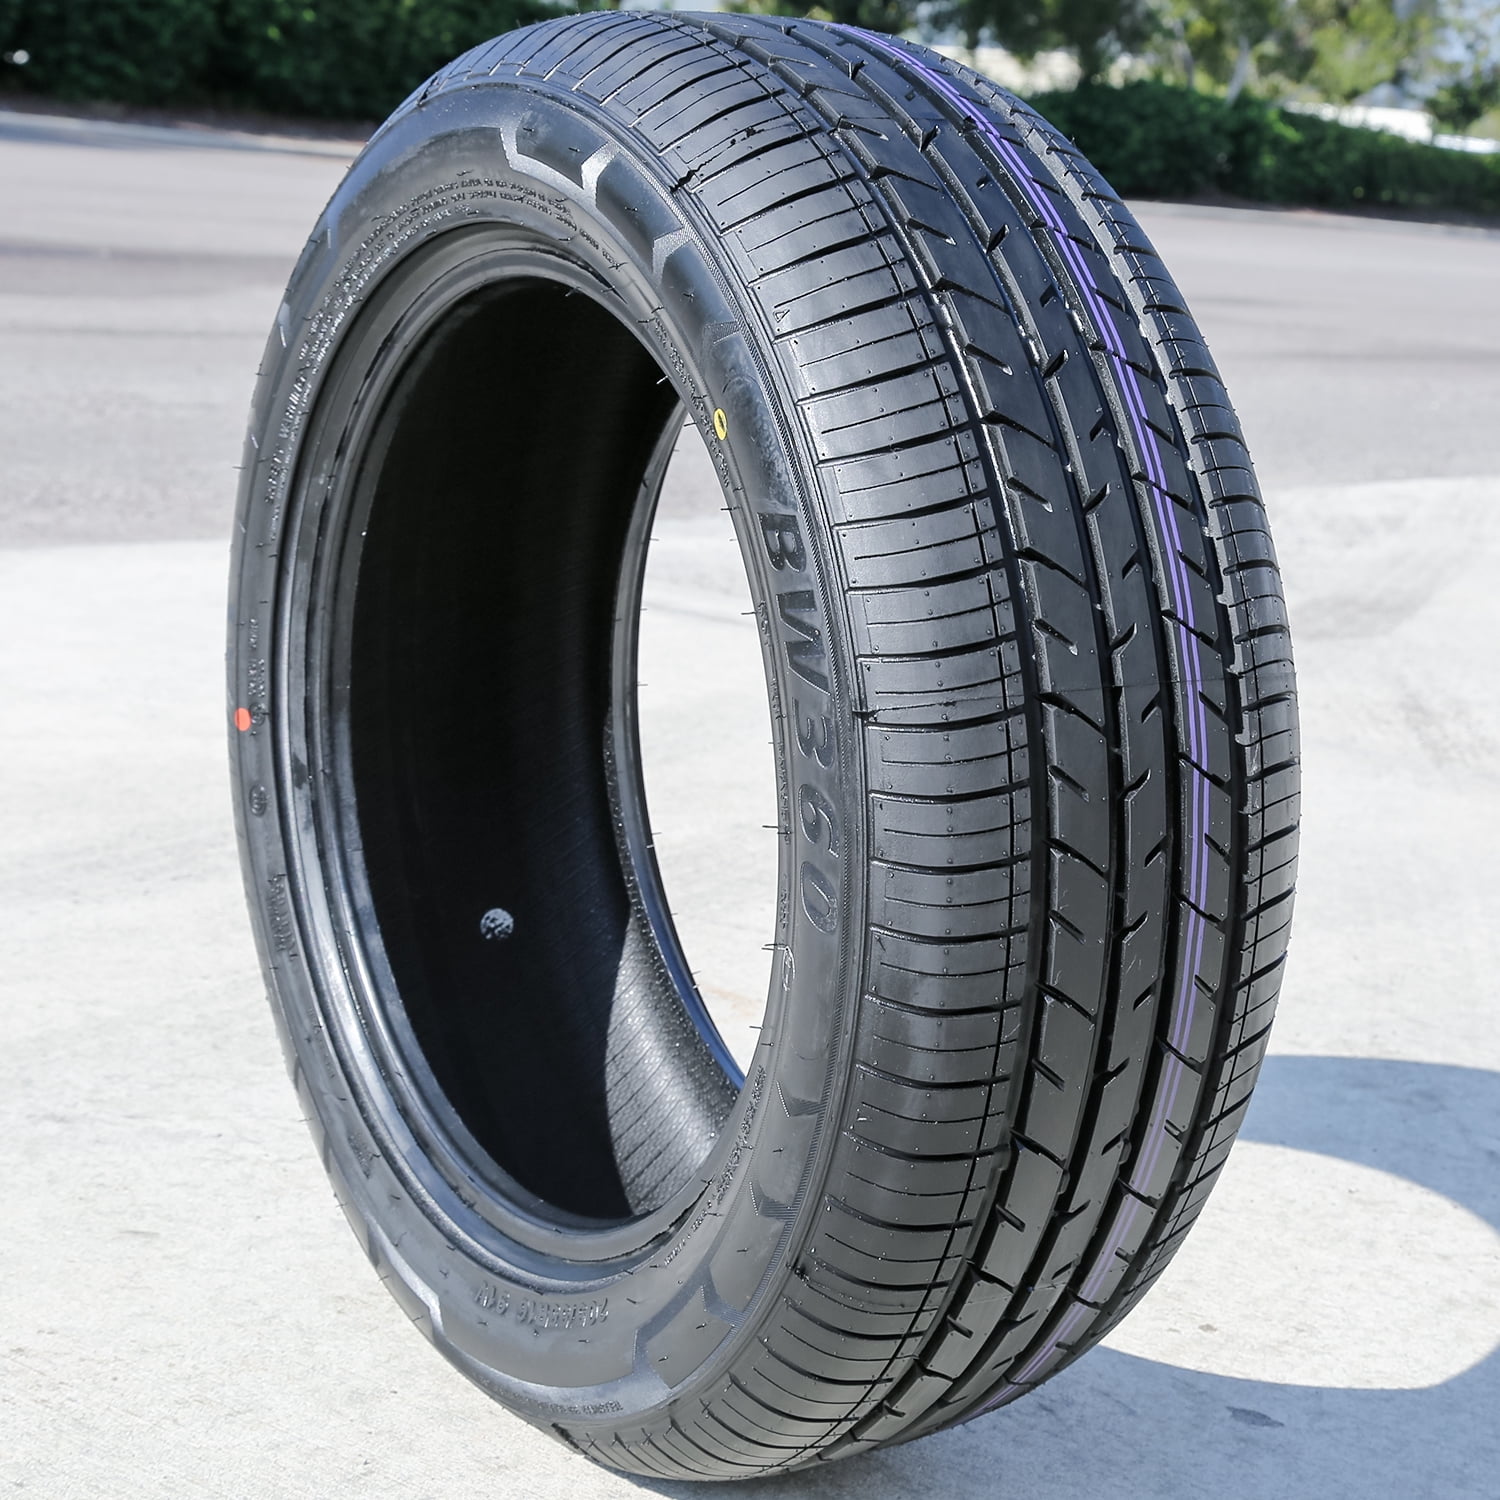 205/55R16 Size Tires: choose the best for your car